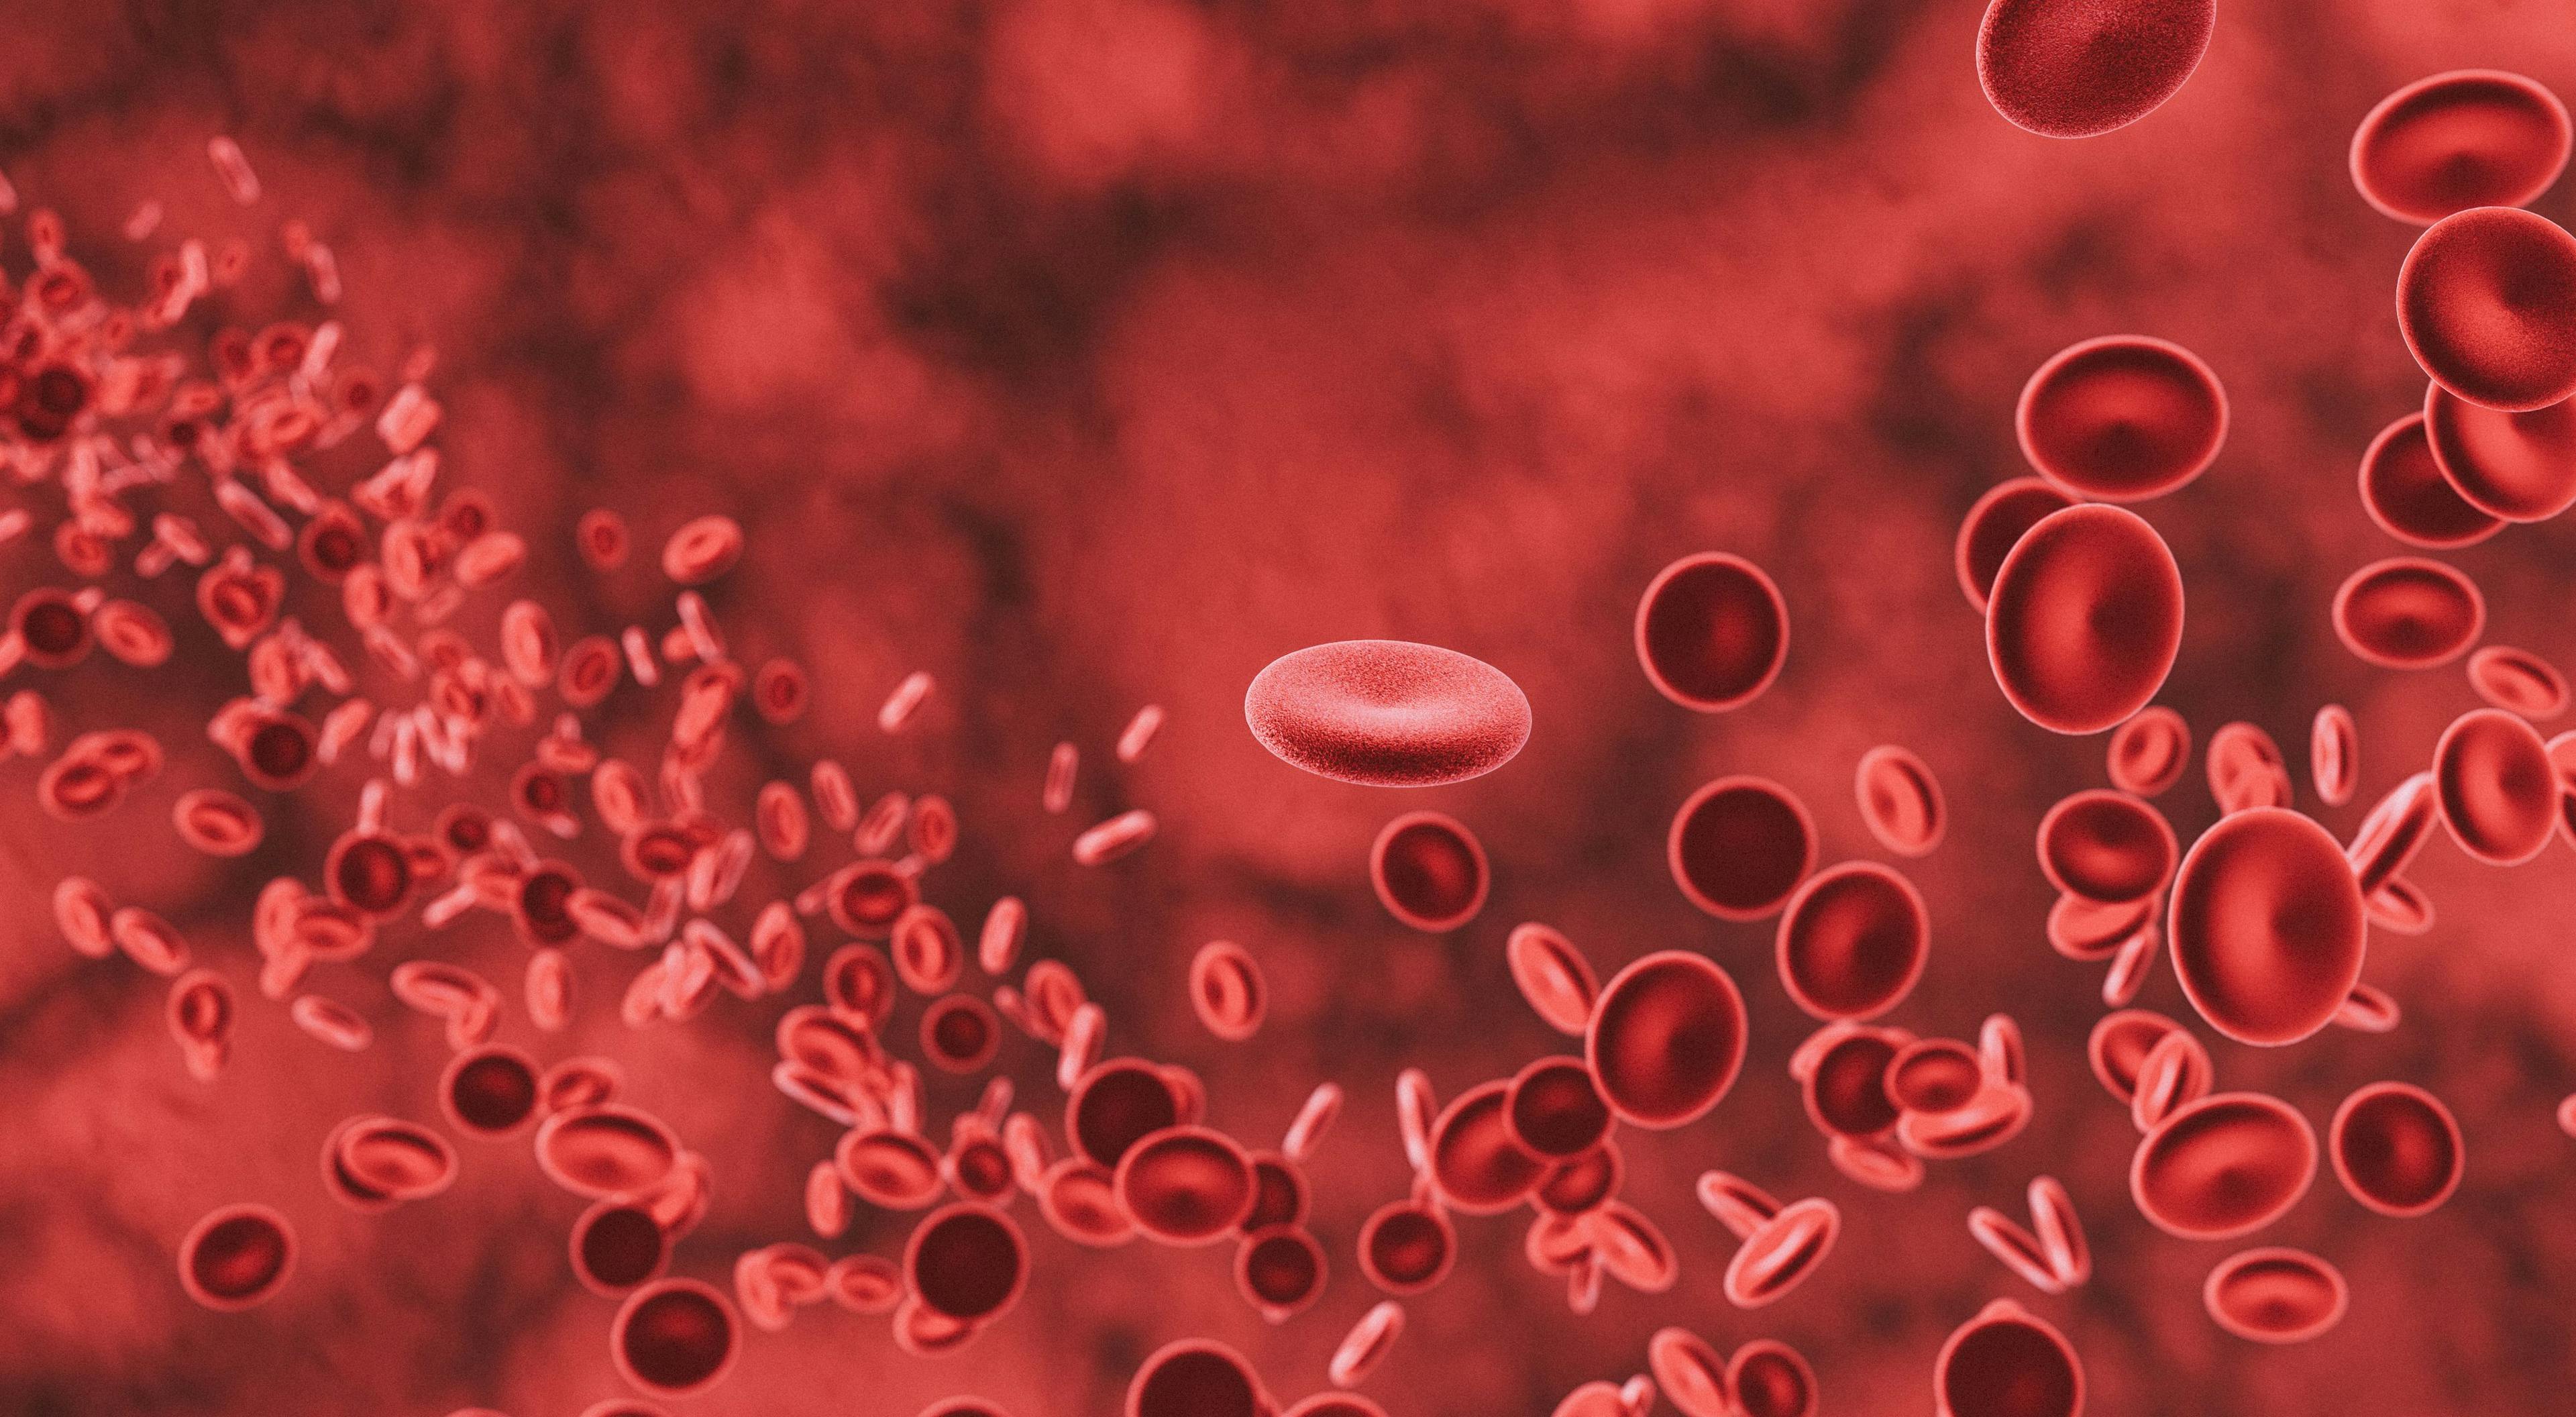 Certain Blood Types Associated With Increased Blood Clotting Risk in Patients With Cancer